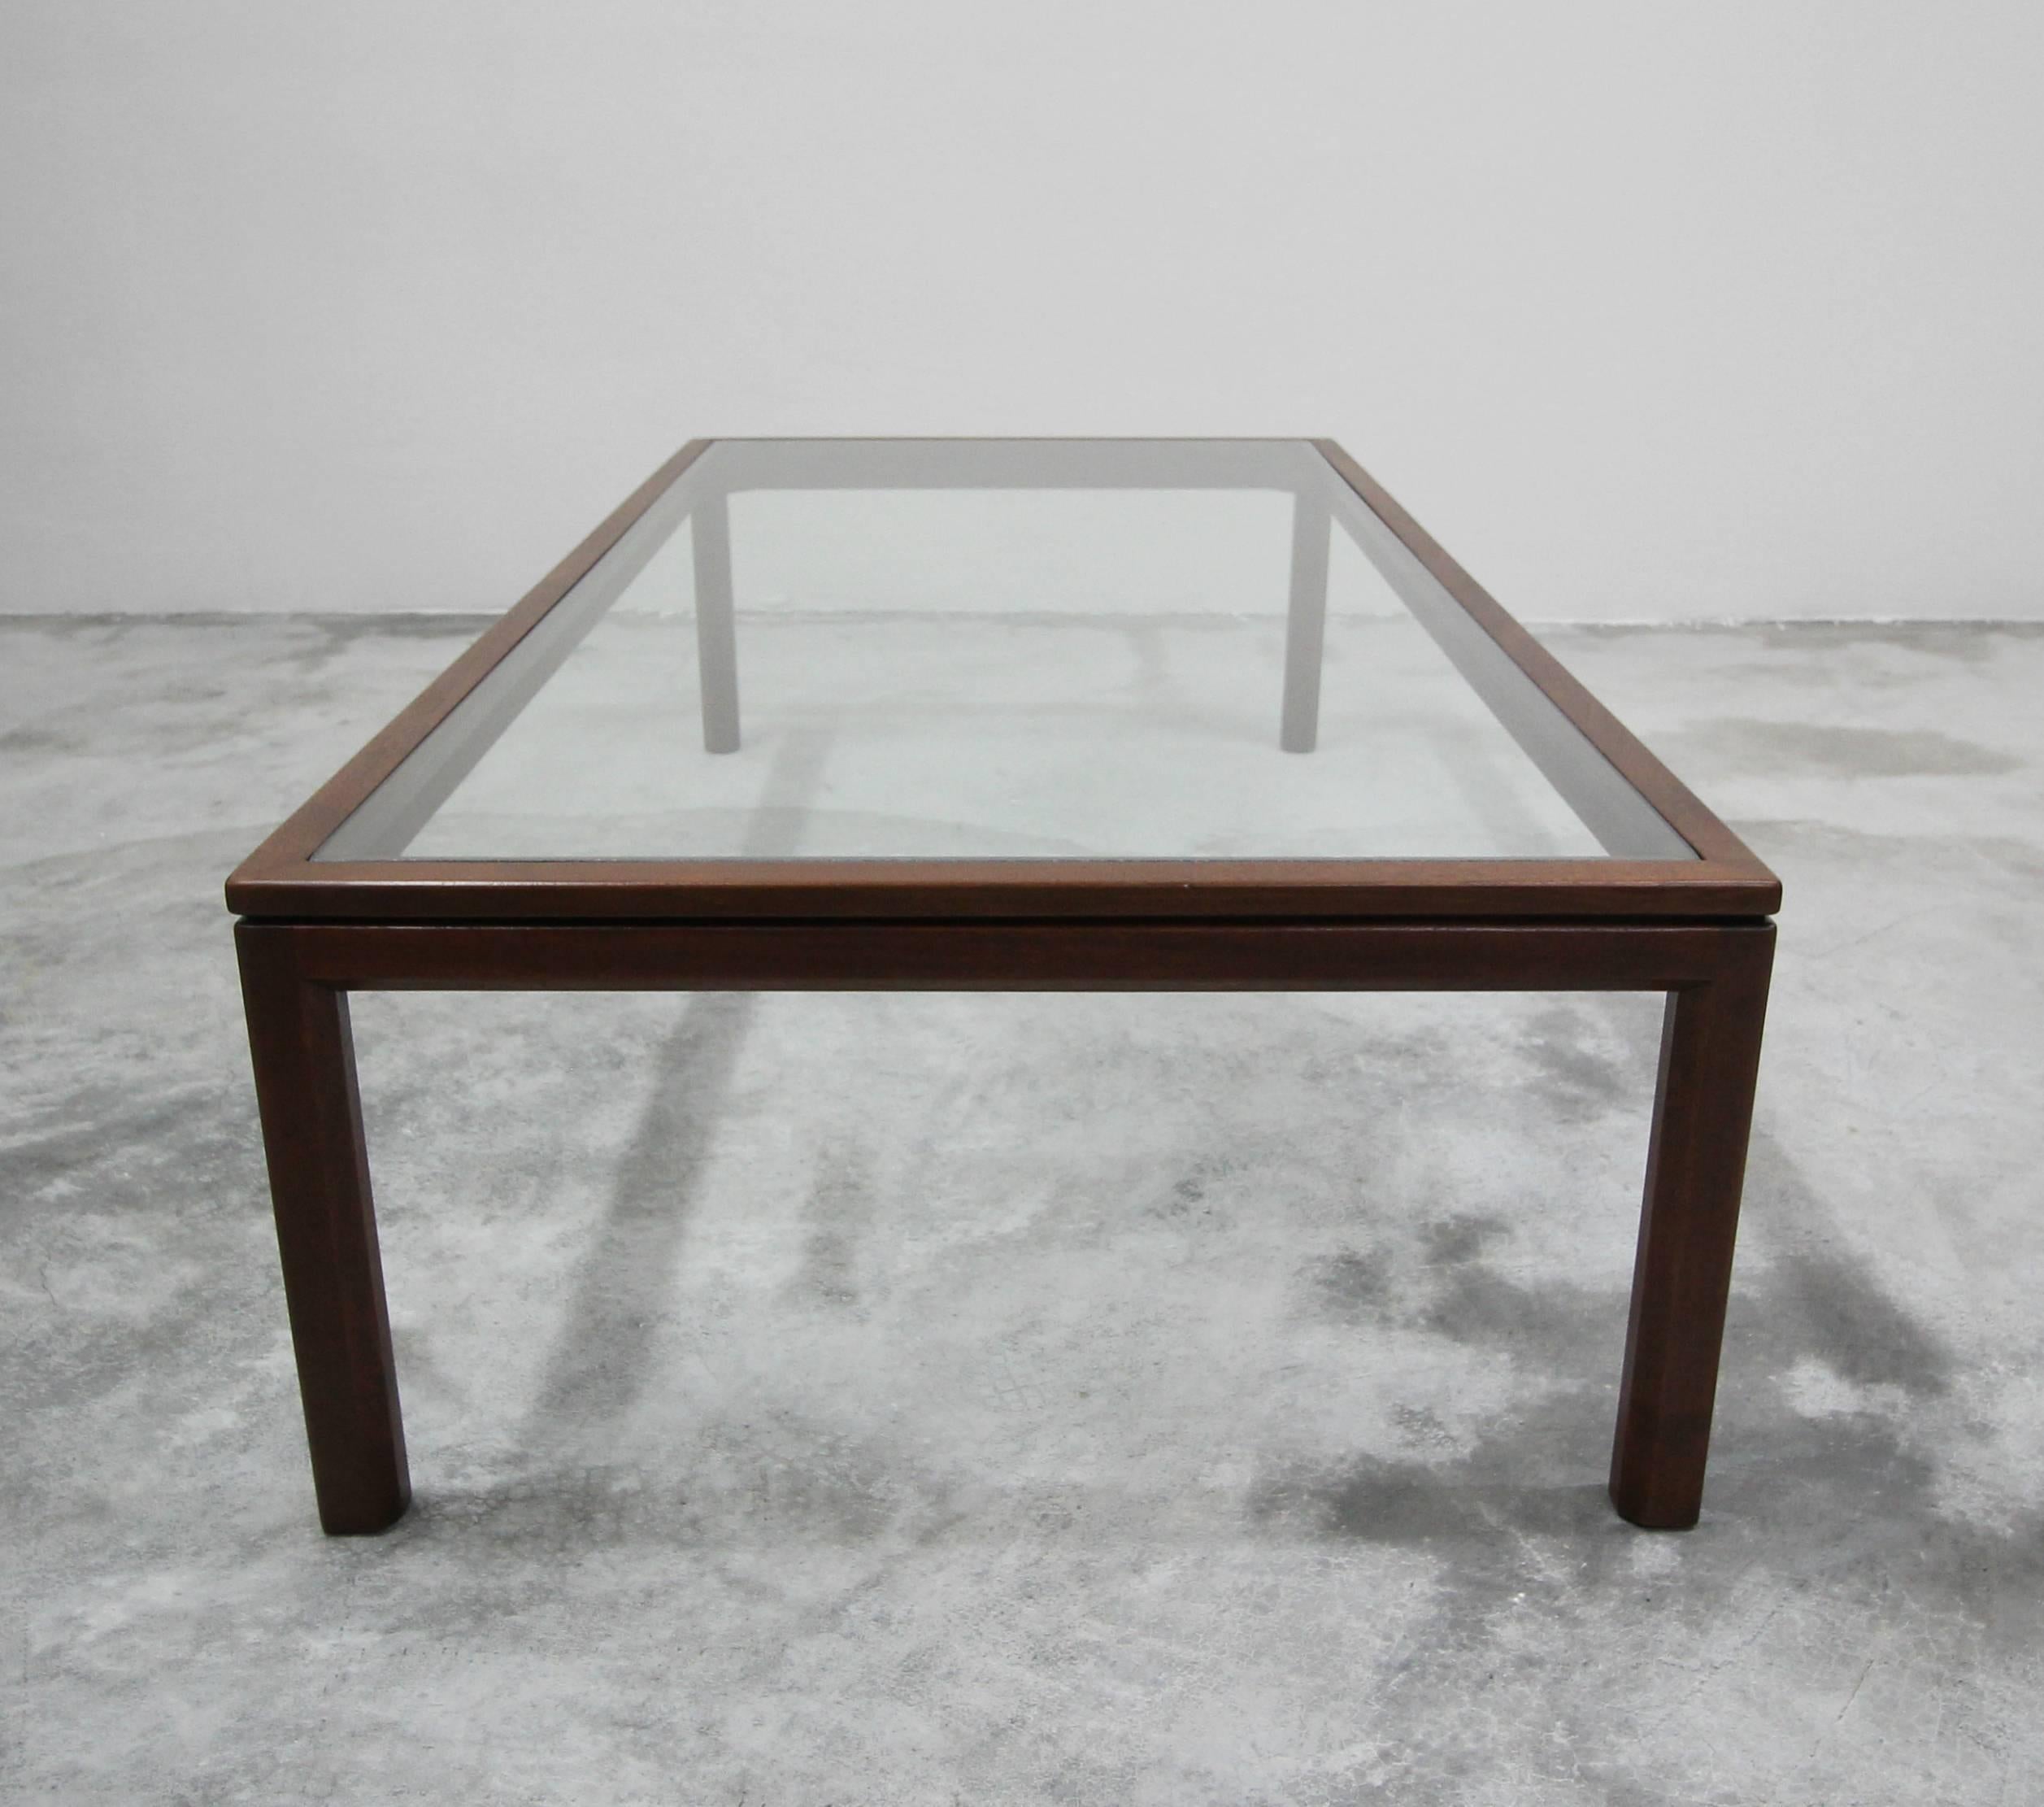 20th Century Midcentury Walnut and Glass Coffee Table by Edward Wormley for Dunbar